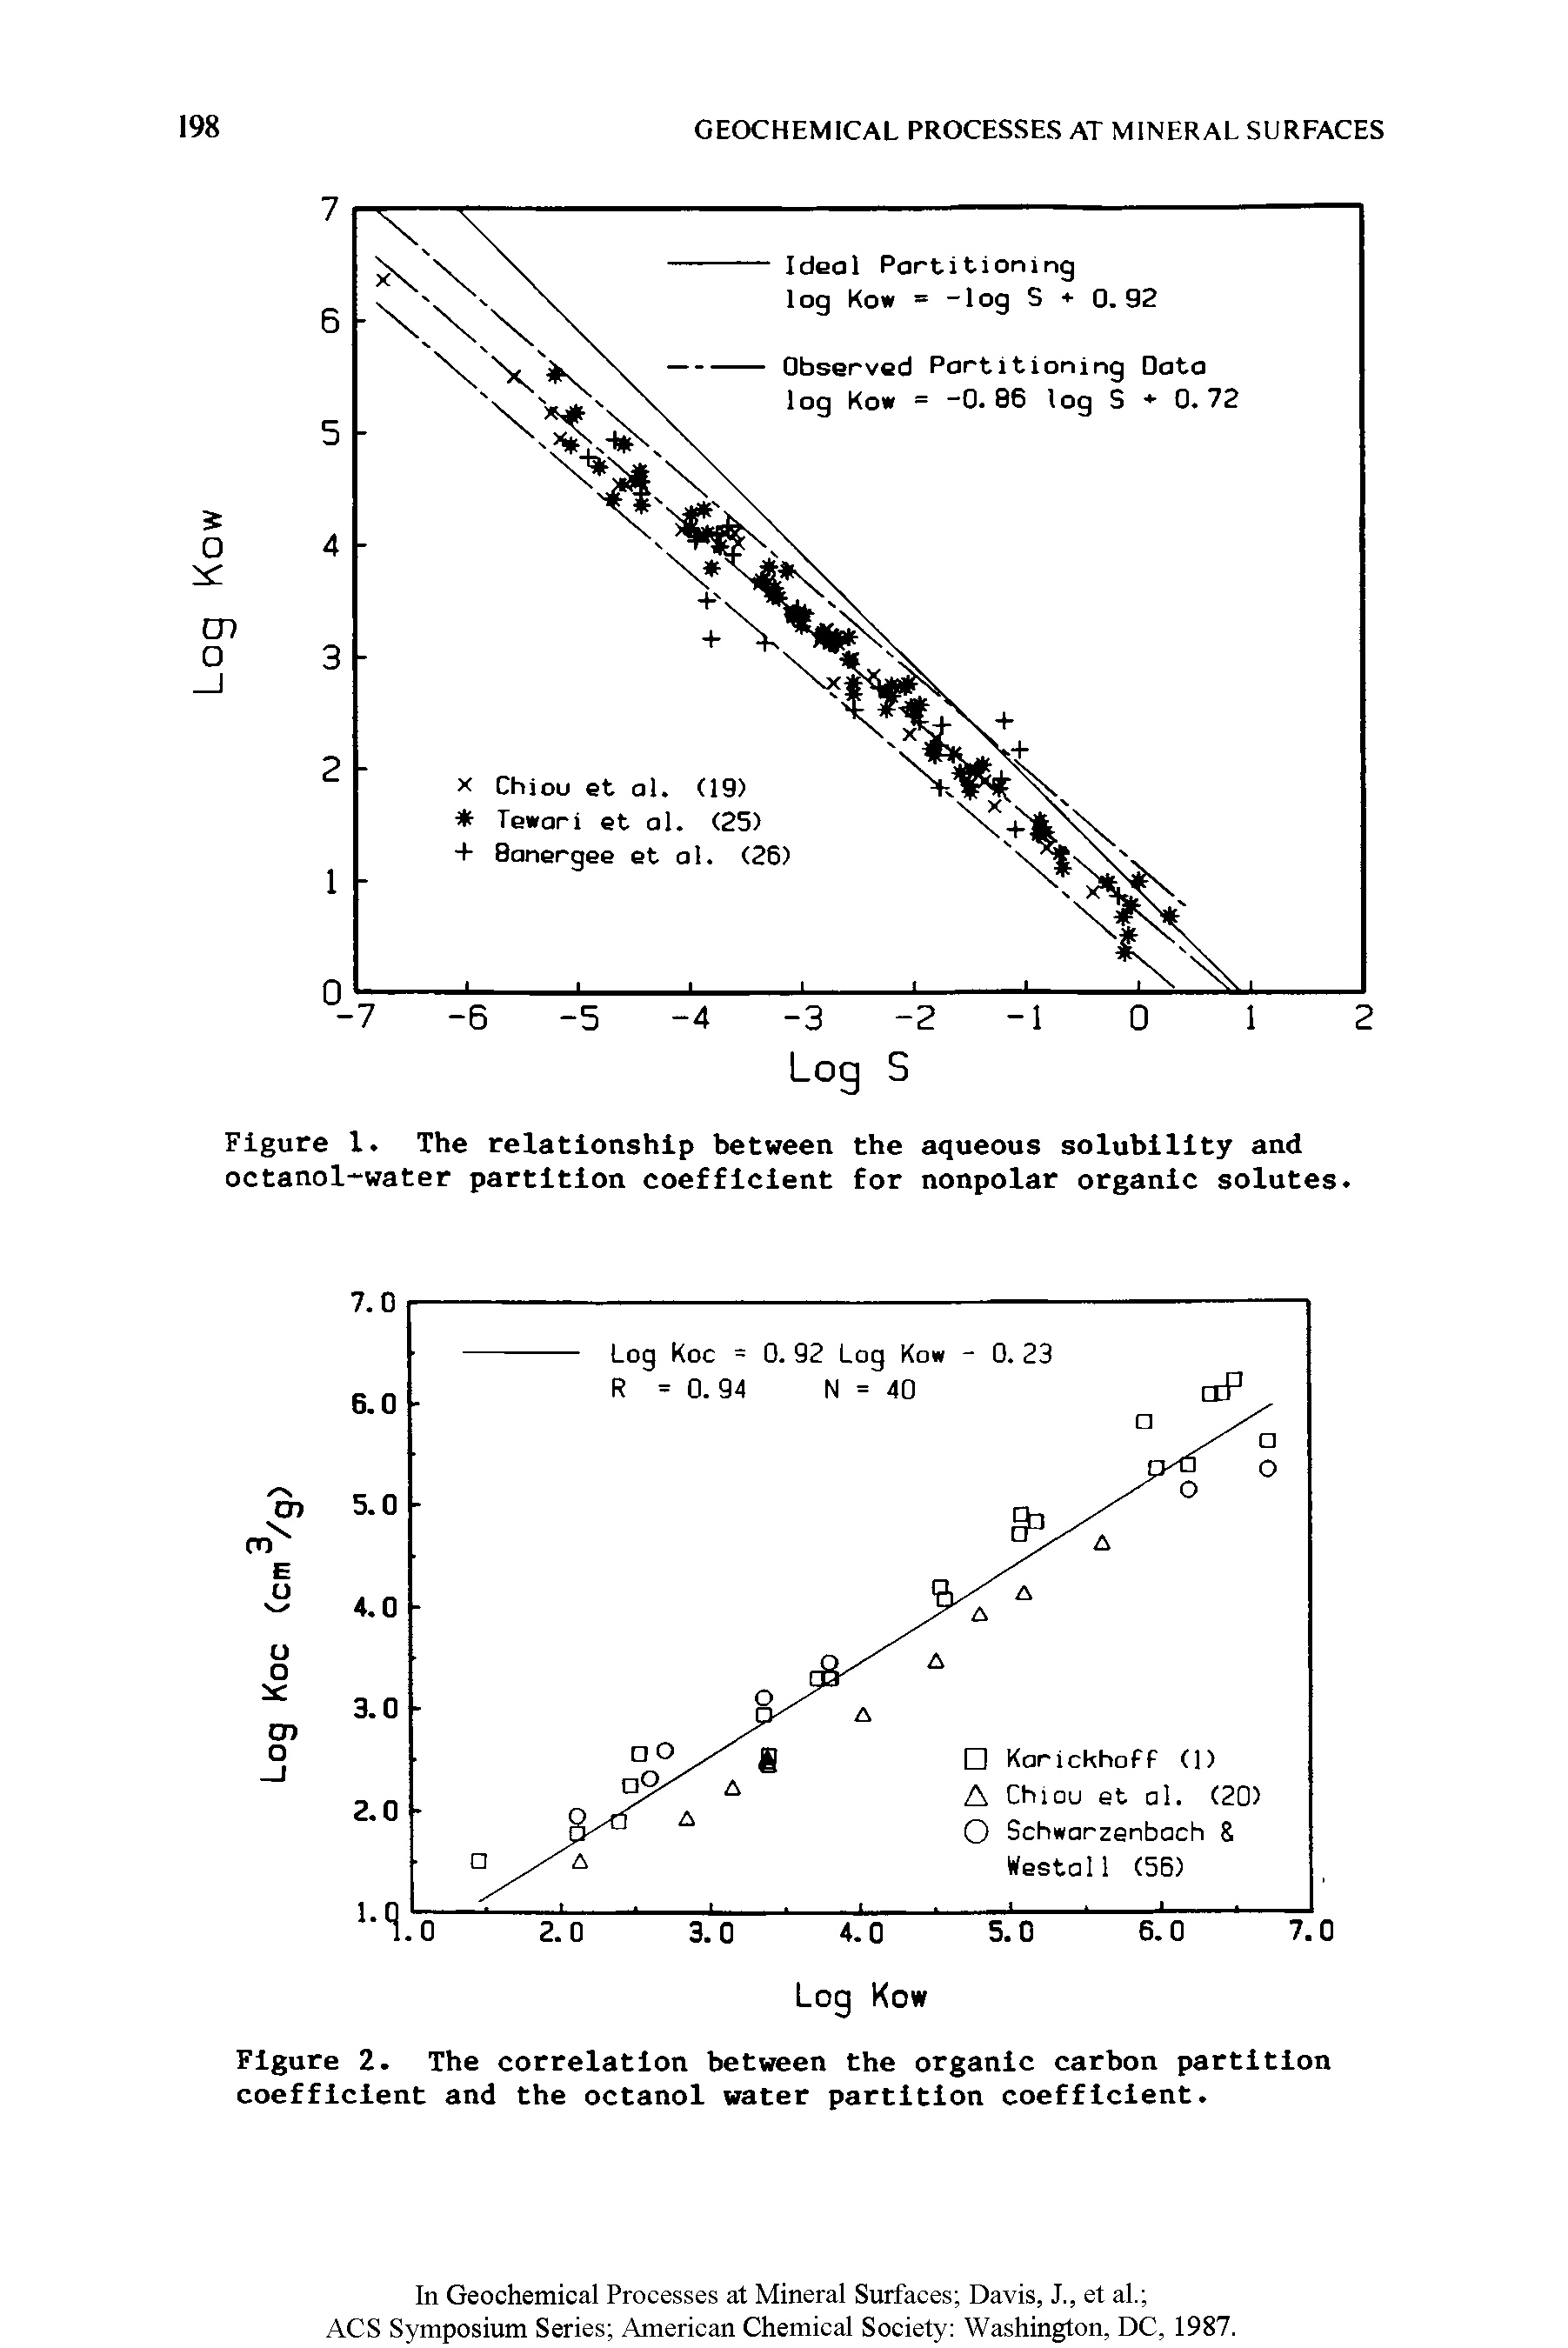 Figure 2. The correlation between the organic carbon partition coefficient and the octanol water partition coefficient.